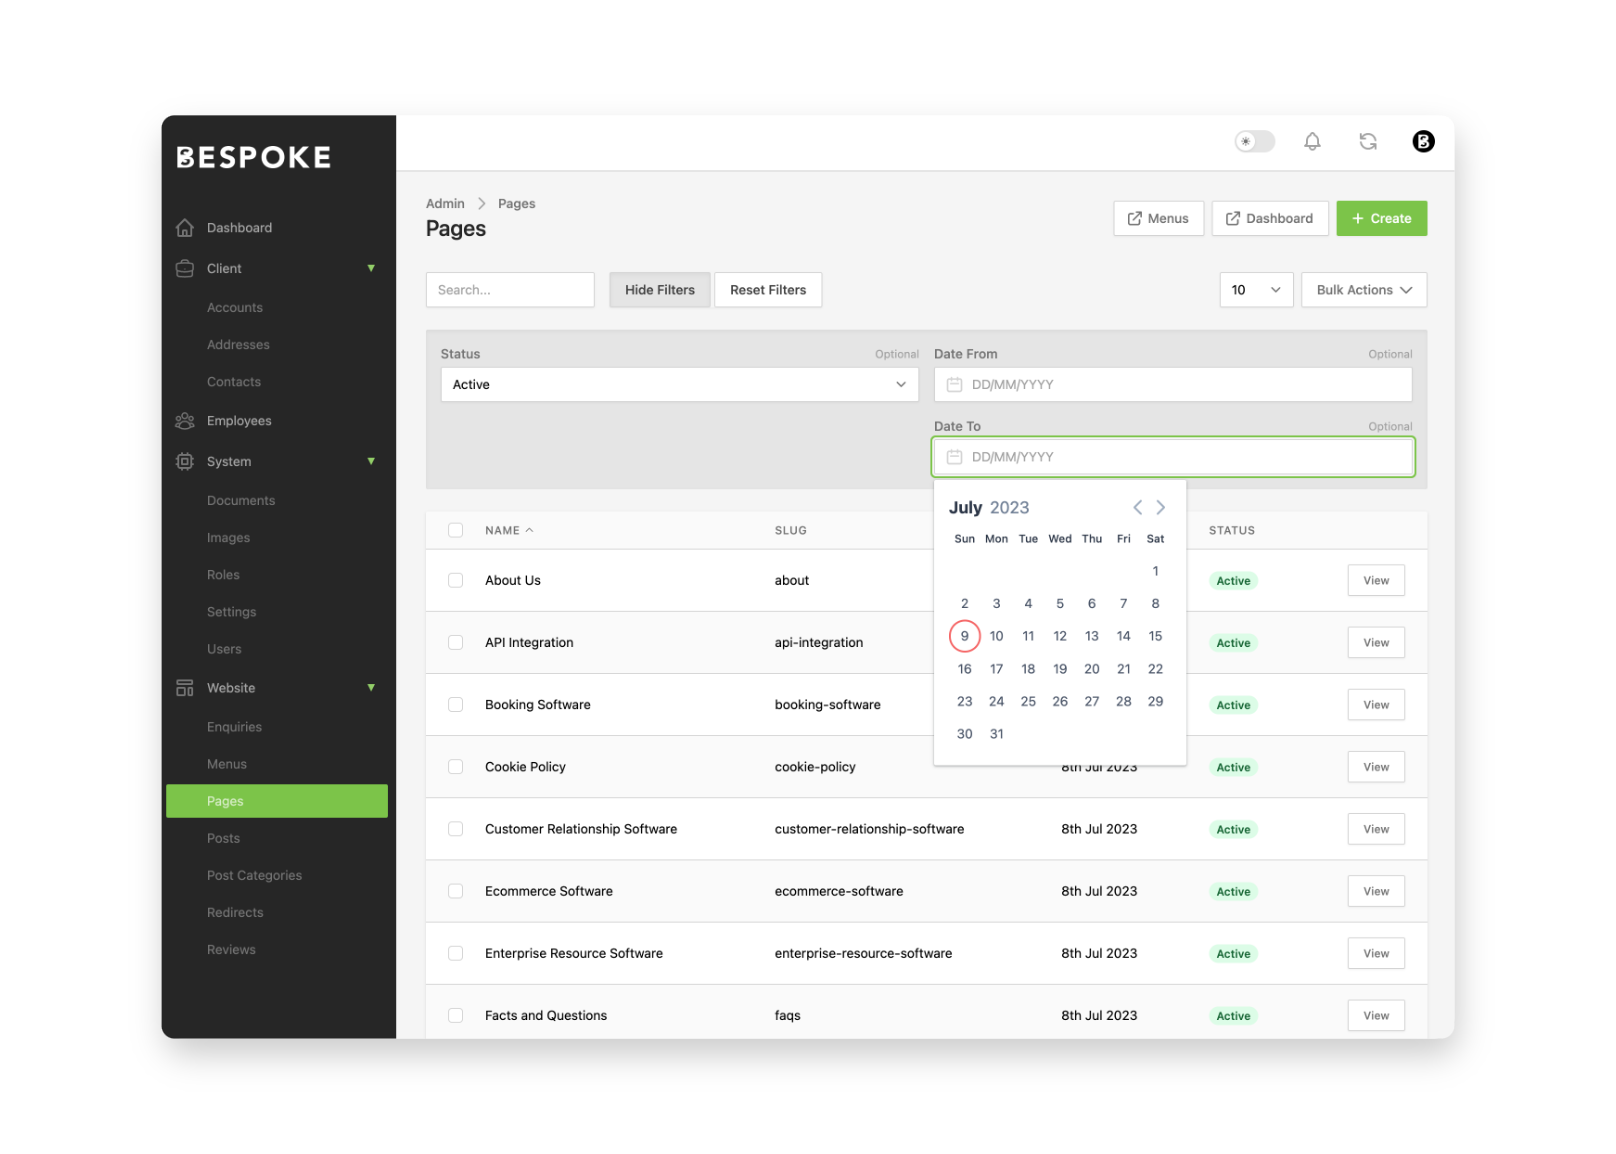 Screenshot of the manage pages section for Bespoke Software